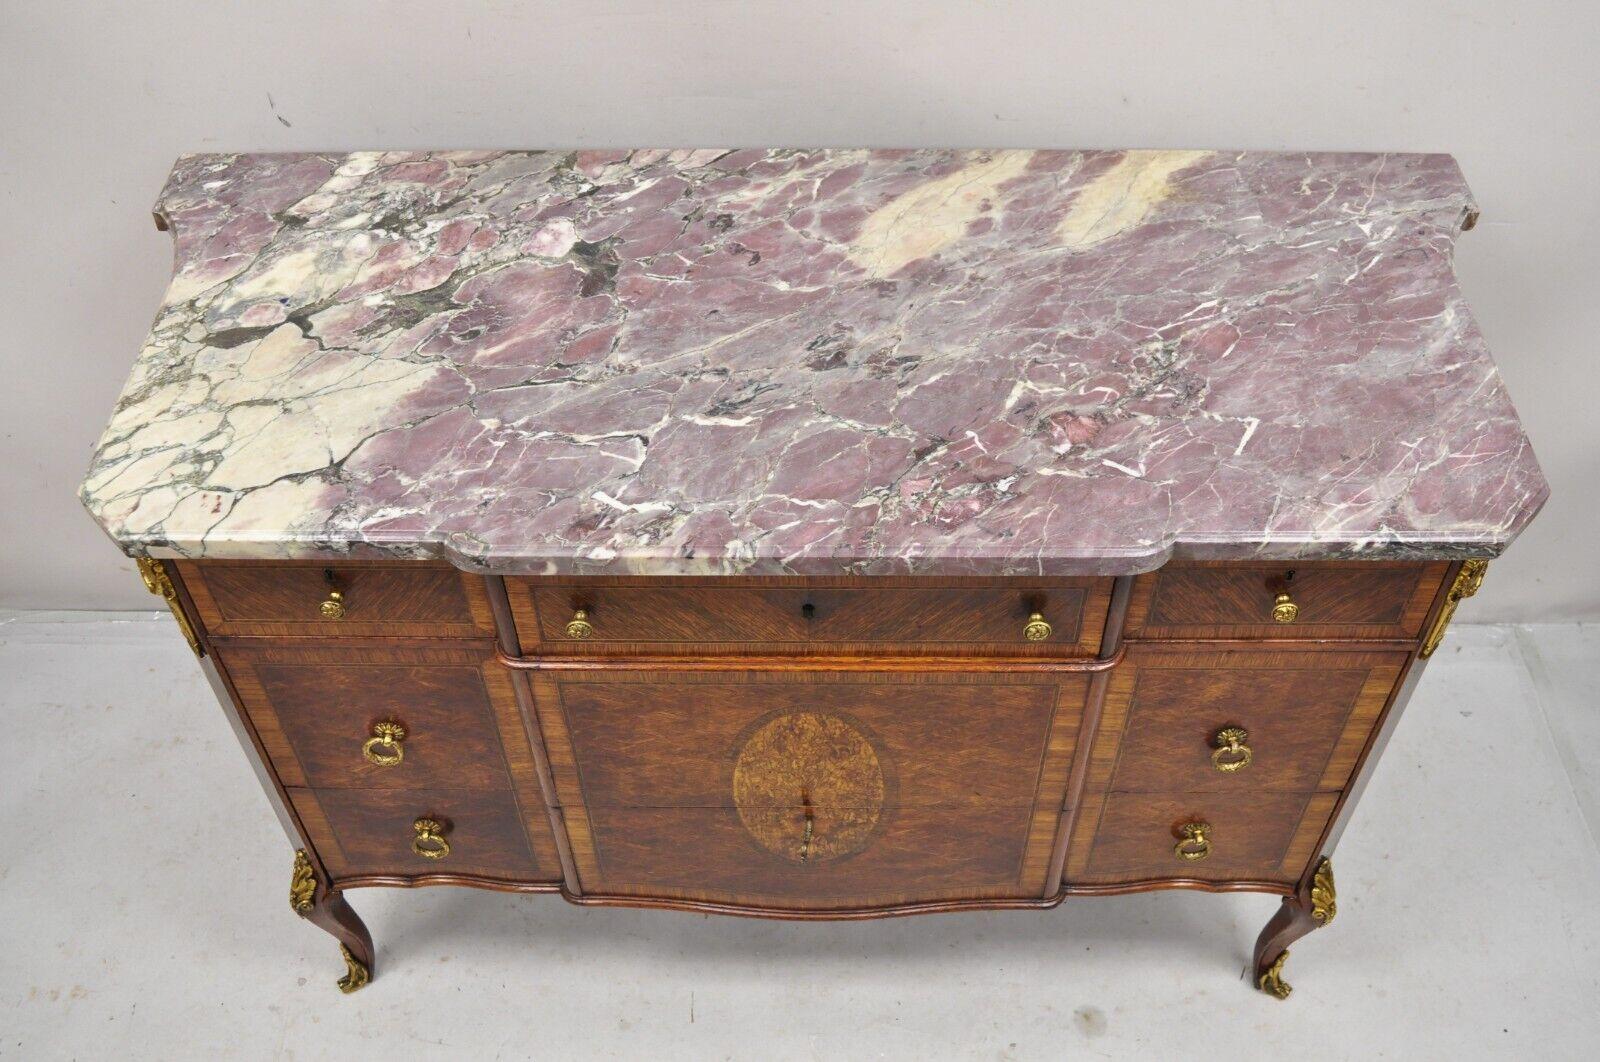 Antique French Louis XV Style Purple Marble Bronze Ormolu Dresser Commode Chest. Item features a shaped rare purple marble top, ornate cast bronze ormolu, floral design satinwood inlay, shaped sides, 5 dovetailed drawers, very nice antique